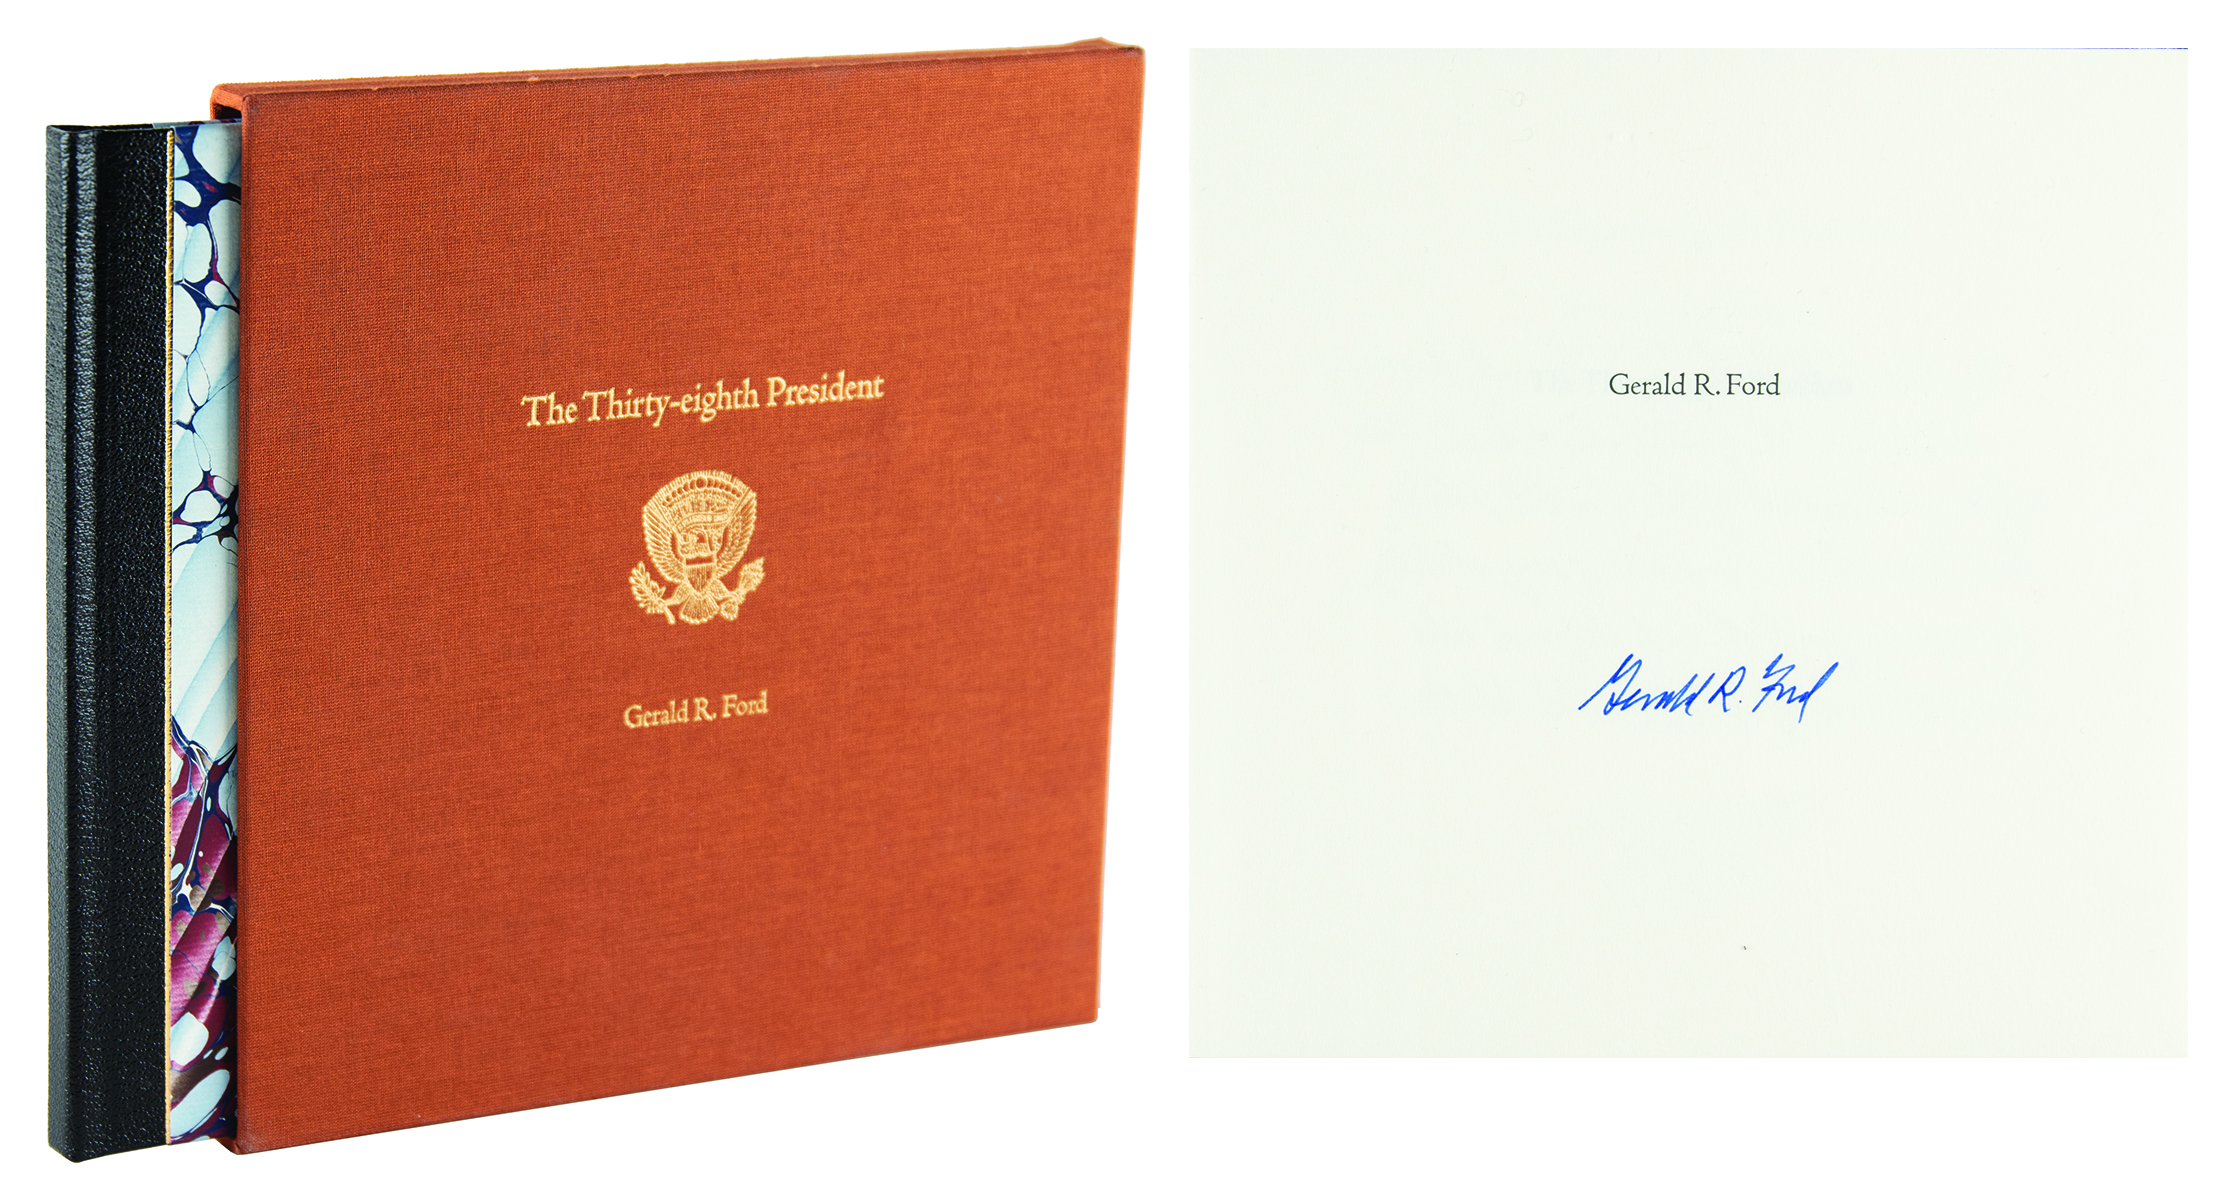 Lot #64 Gerald Ford Signed Book